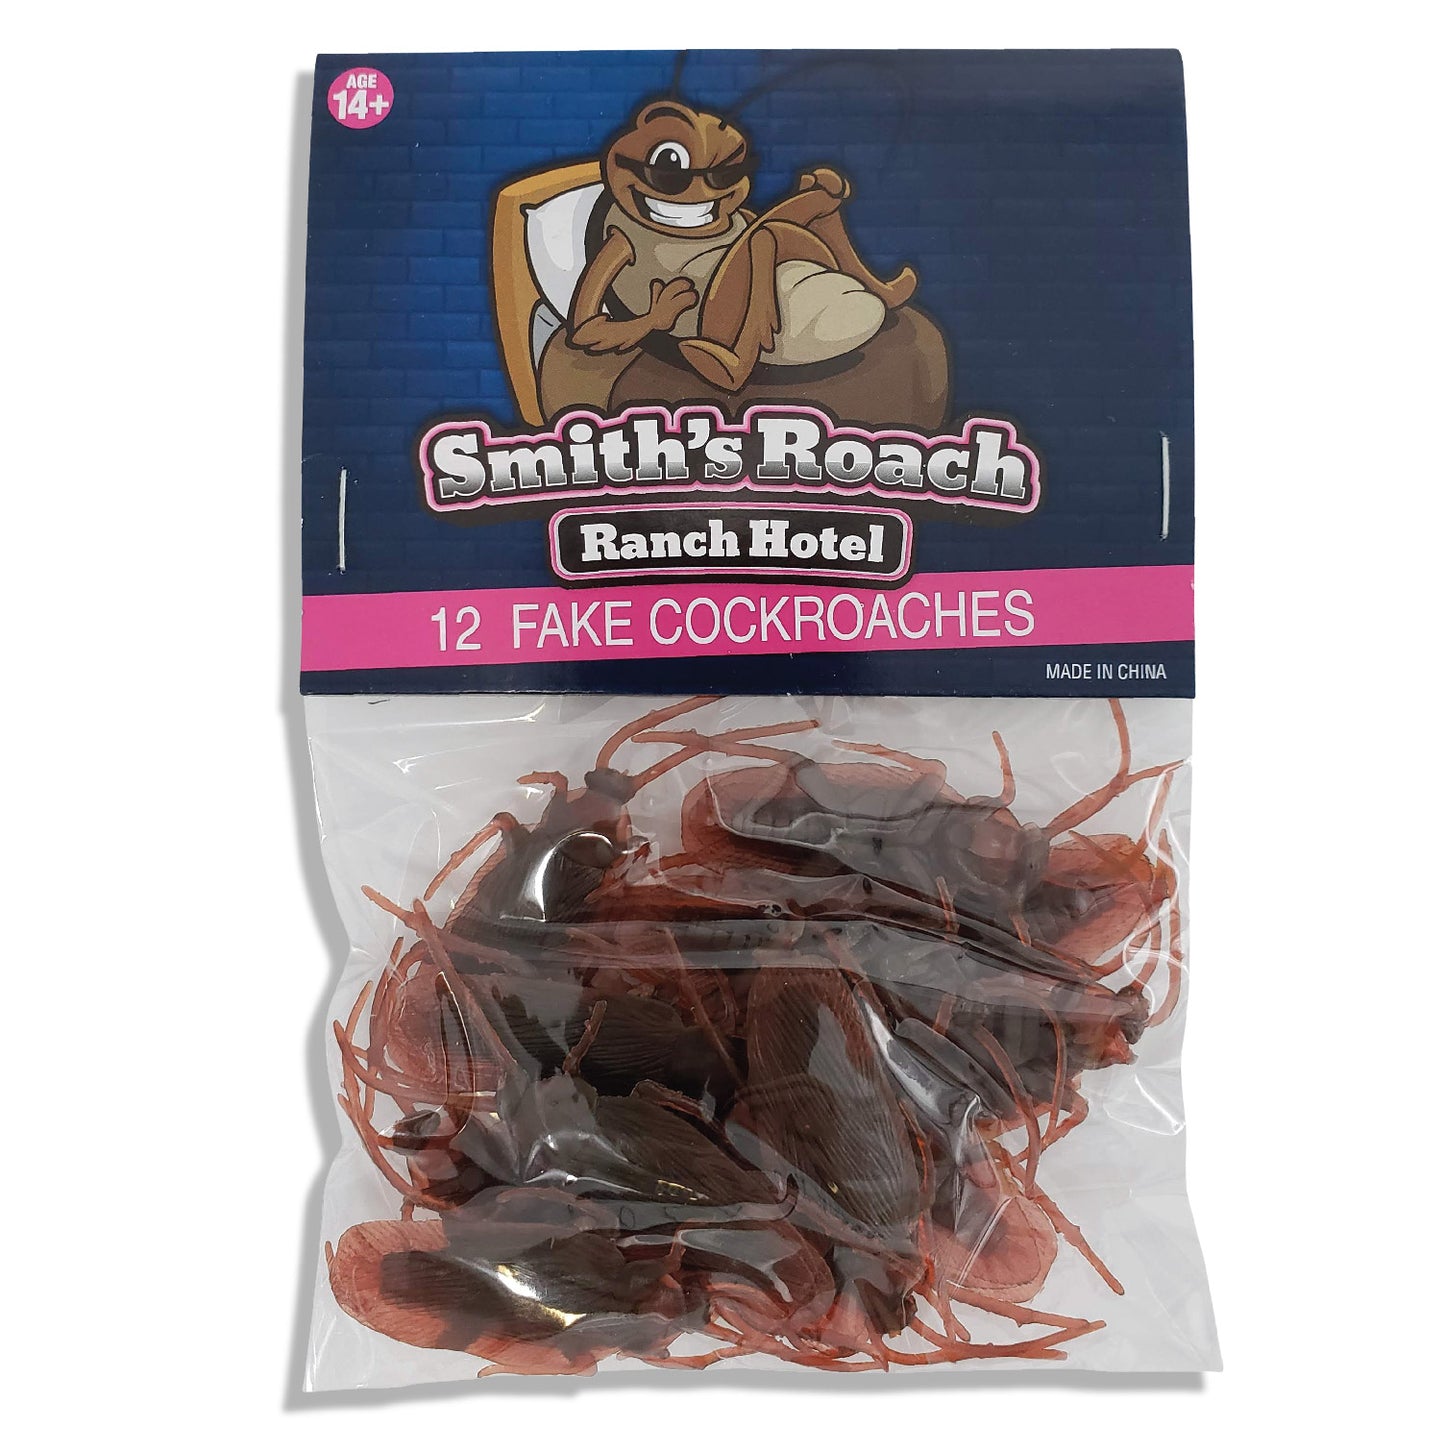 12 x Fake Roaches - Bag of Cockroaches That Look Real - Realistic Plastic Bugs